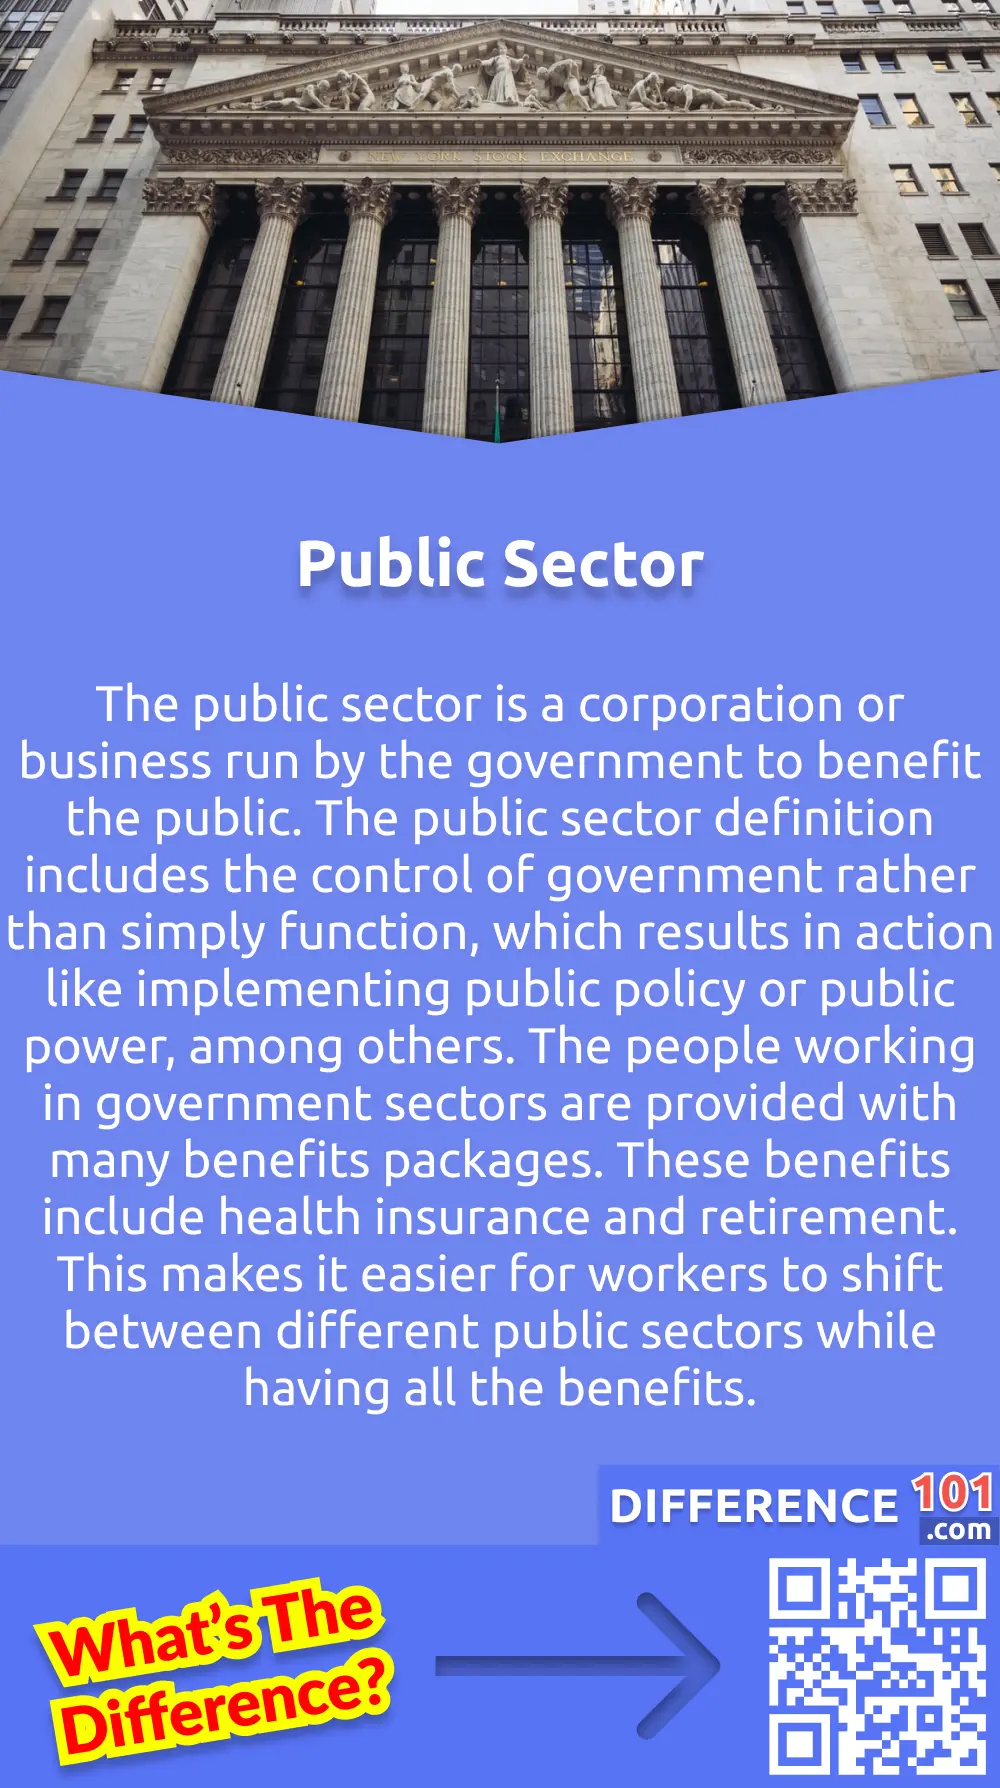 public sector and private sector difference